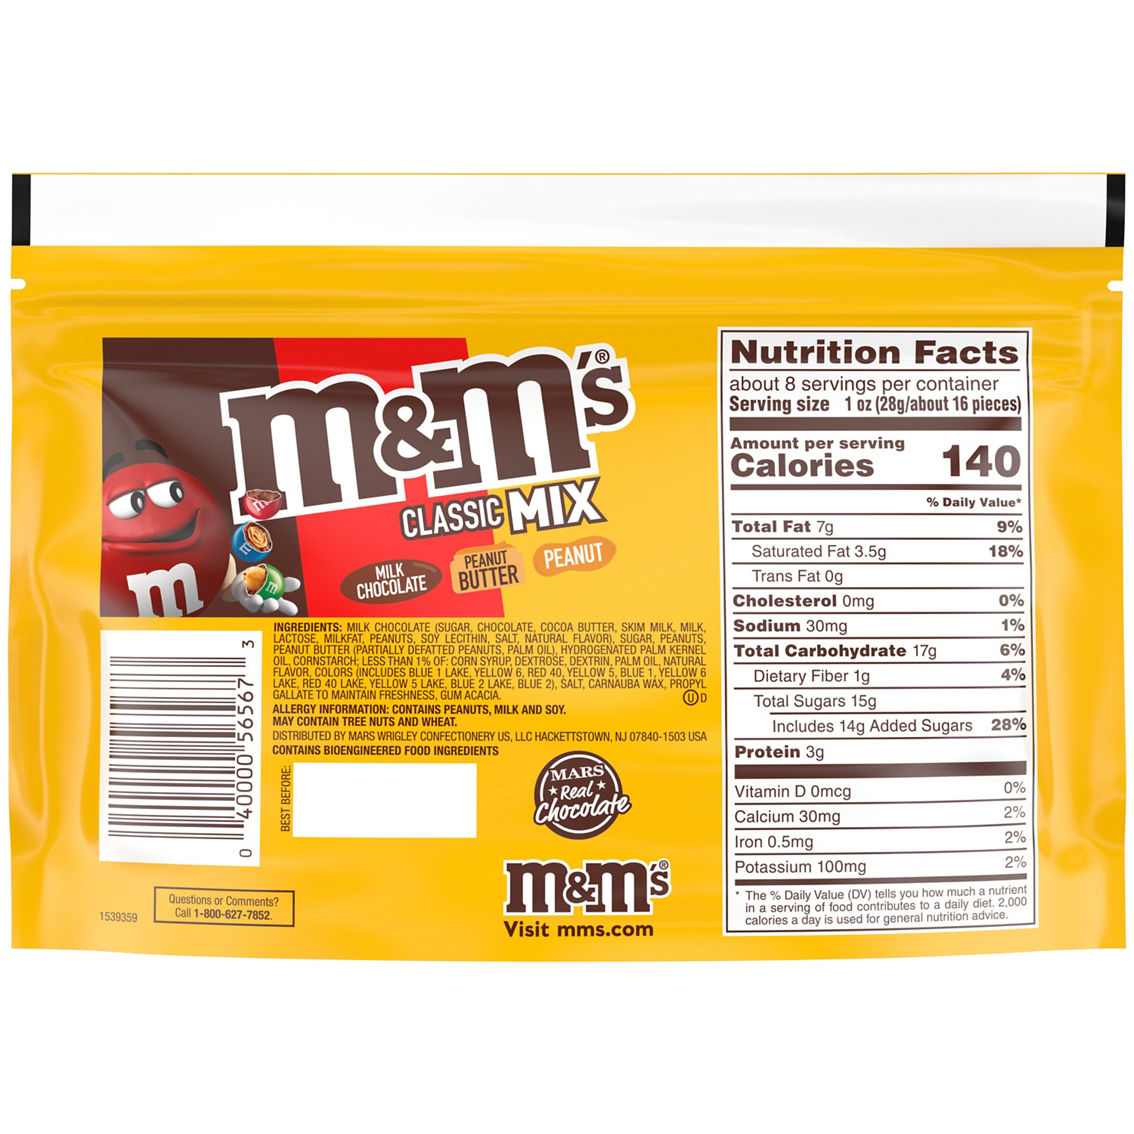 M&M's Classic Mix of Peanut, Peanut Butter & Milk Chocolate Candy, Sharing Size - Image 2 of 2